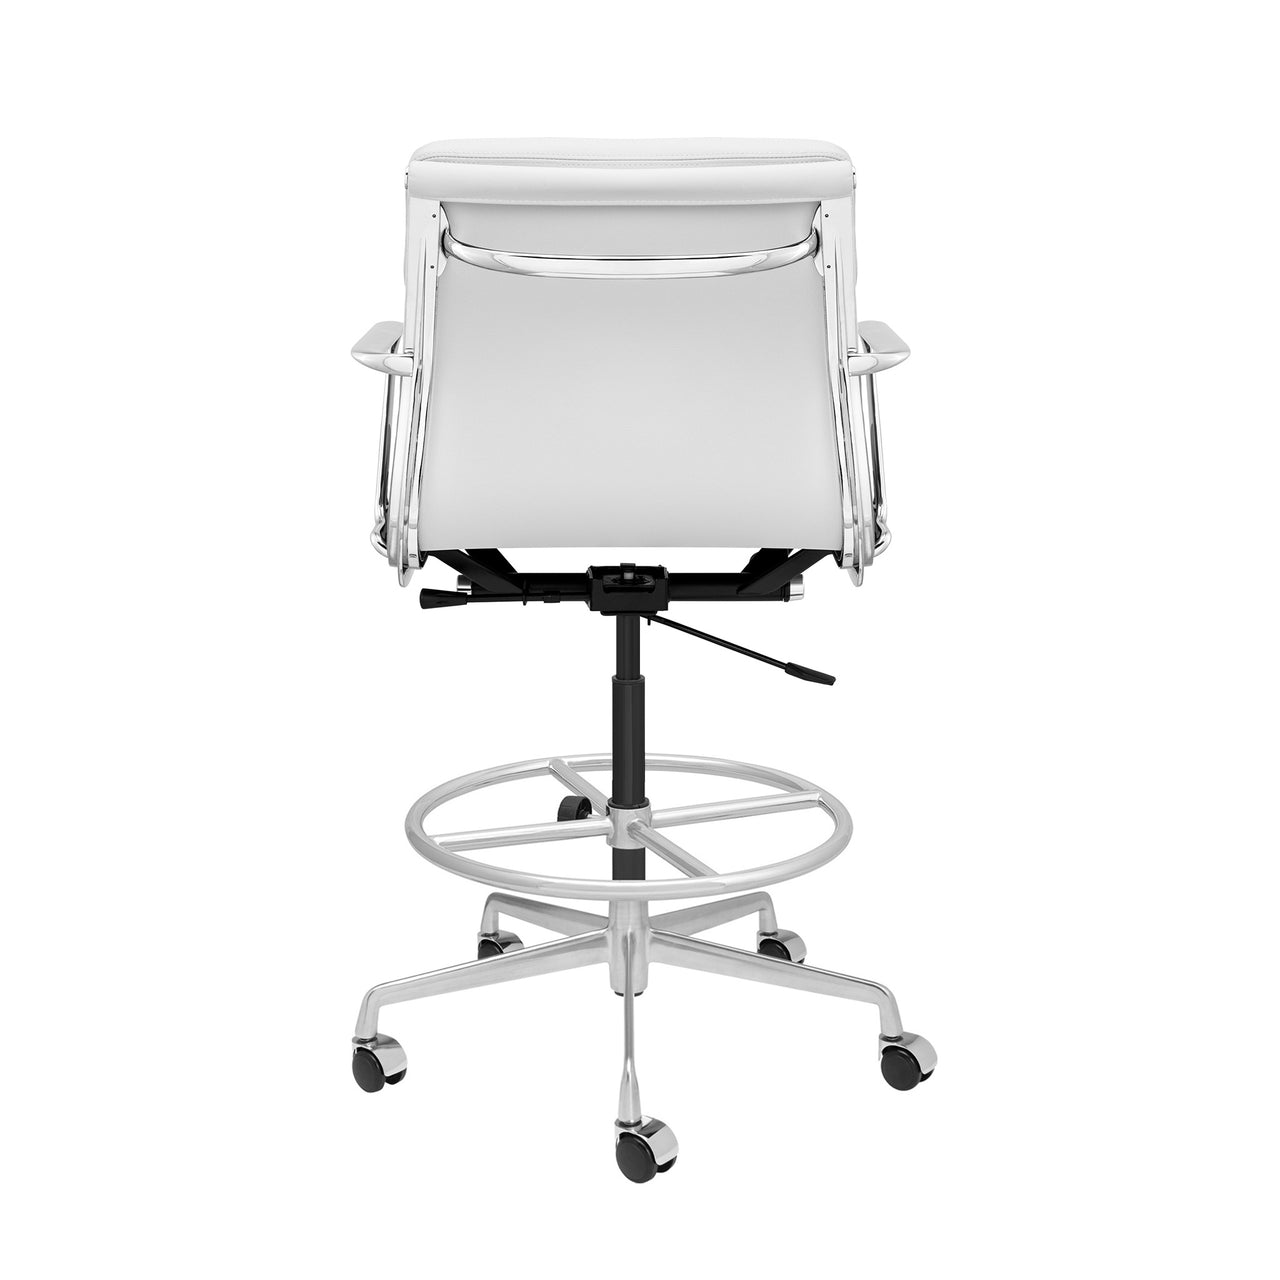 Pro Soft Pad Drafting Chair (White Italian Leather)